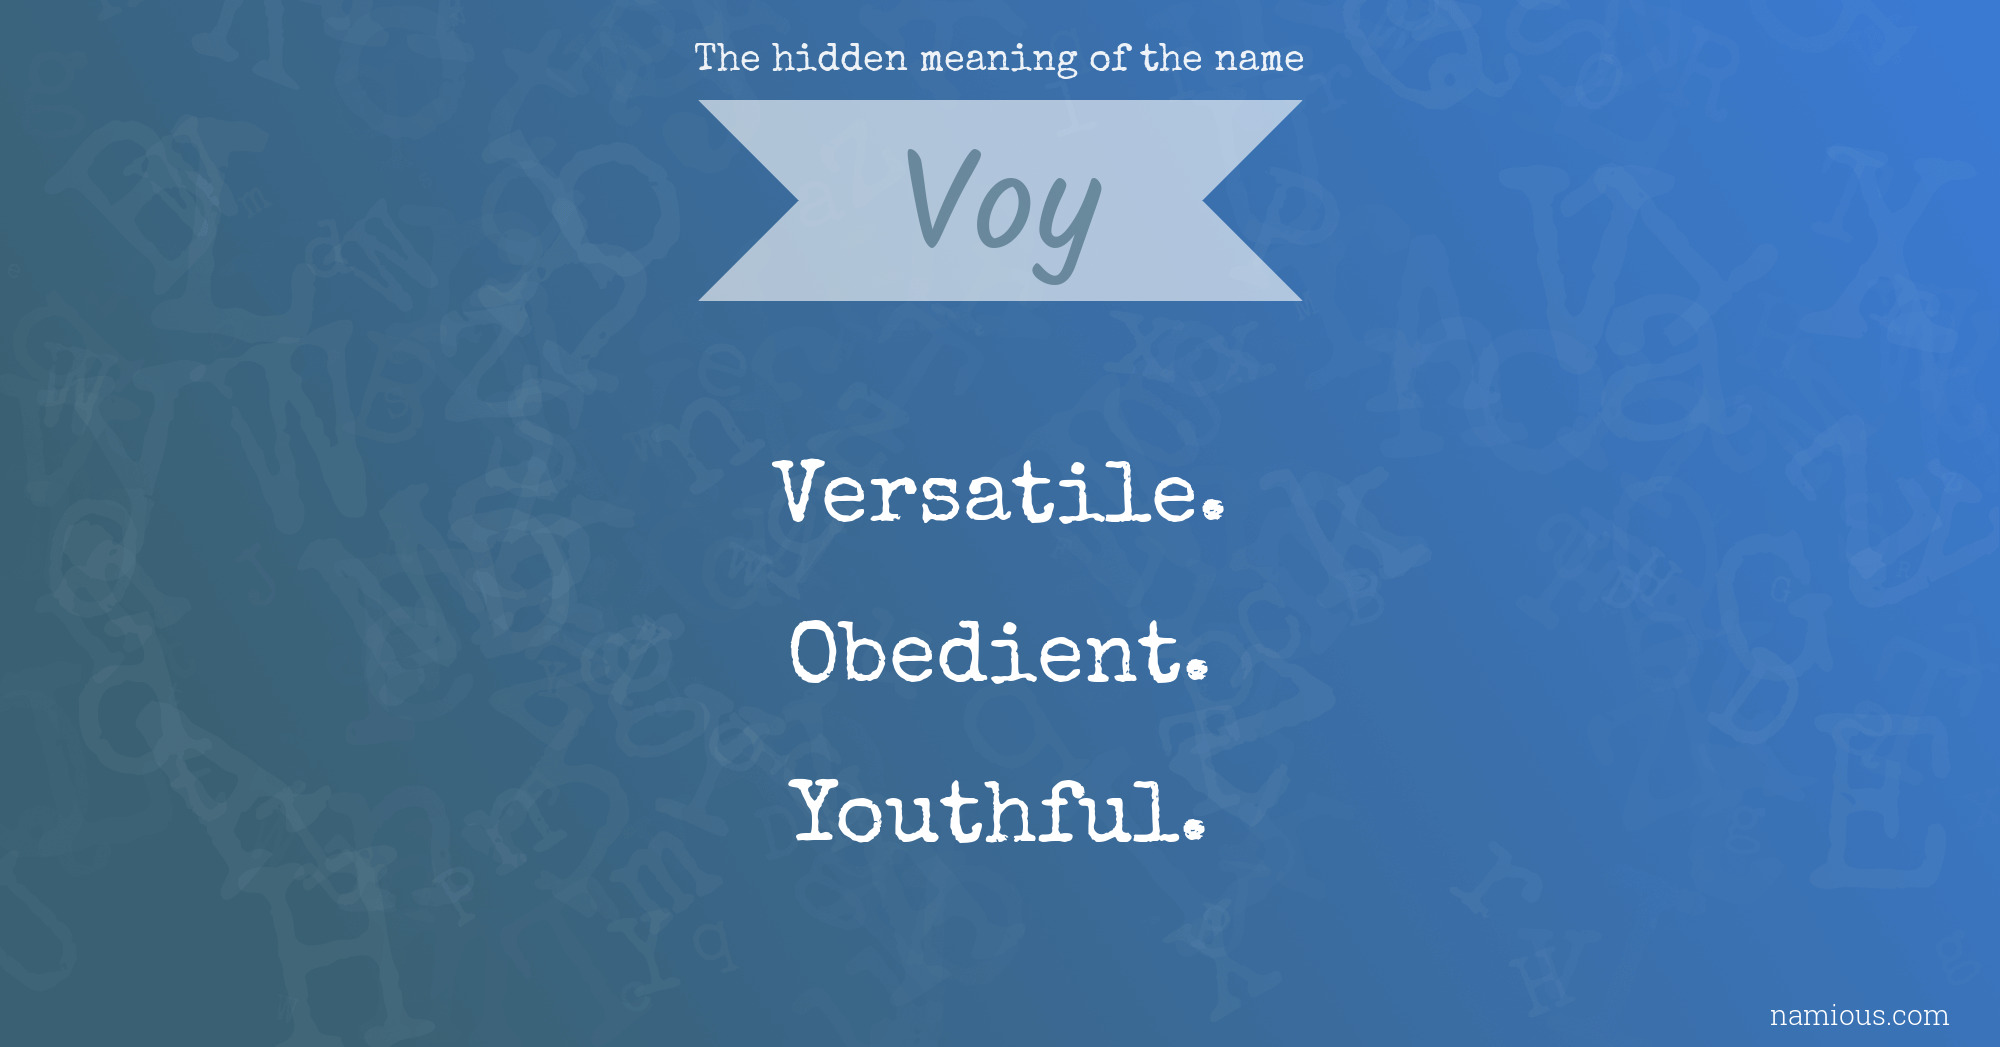 The hidden meaning of the name Voy